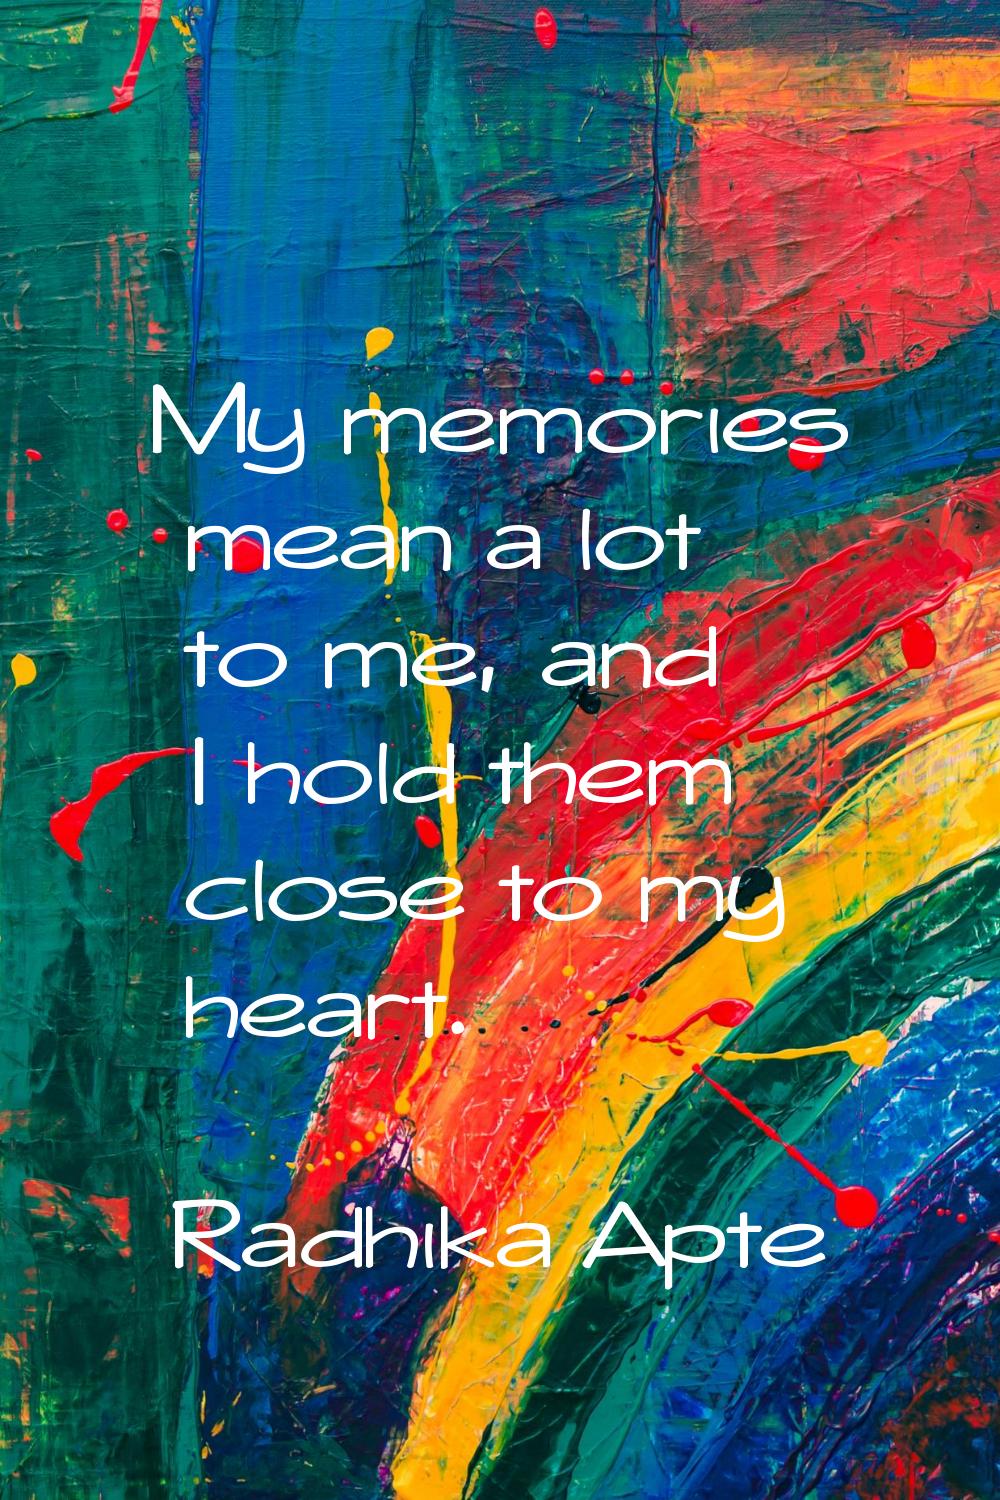 My memories mean a lot to me, and I hold them close to my heart.